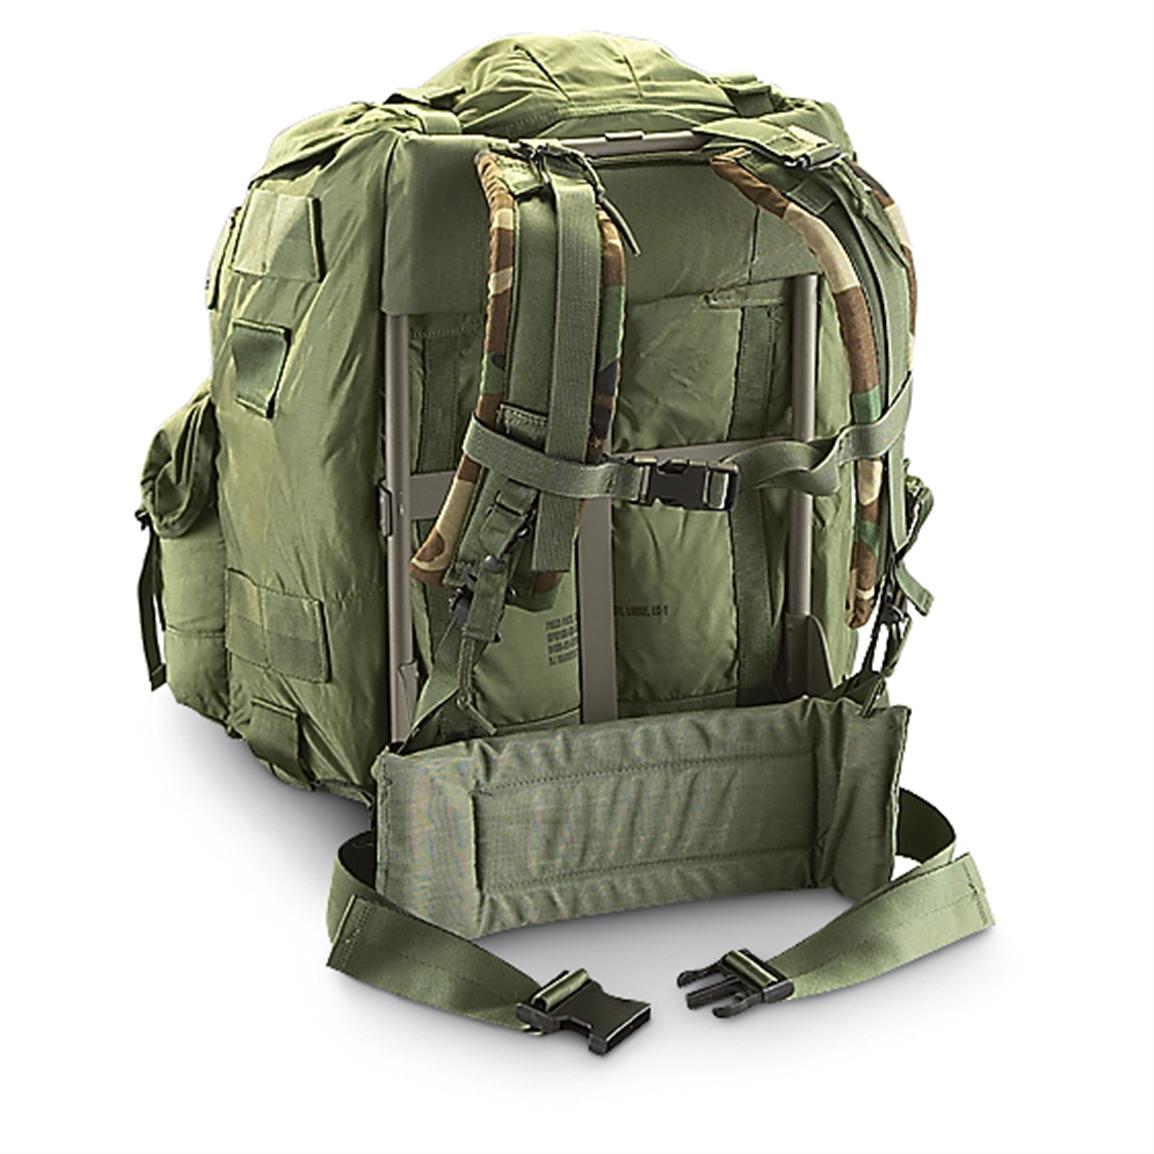 New U.S. Military Large A.L.I.C.E. Pack with Metal Frame, Camo - 167398 ...